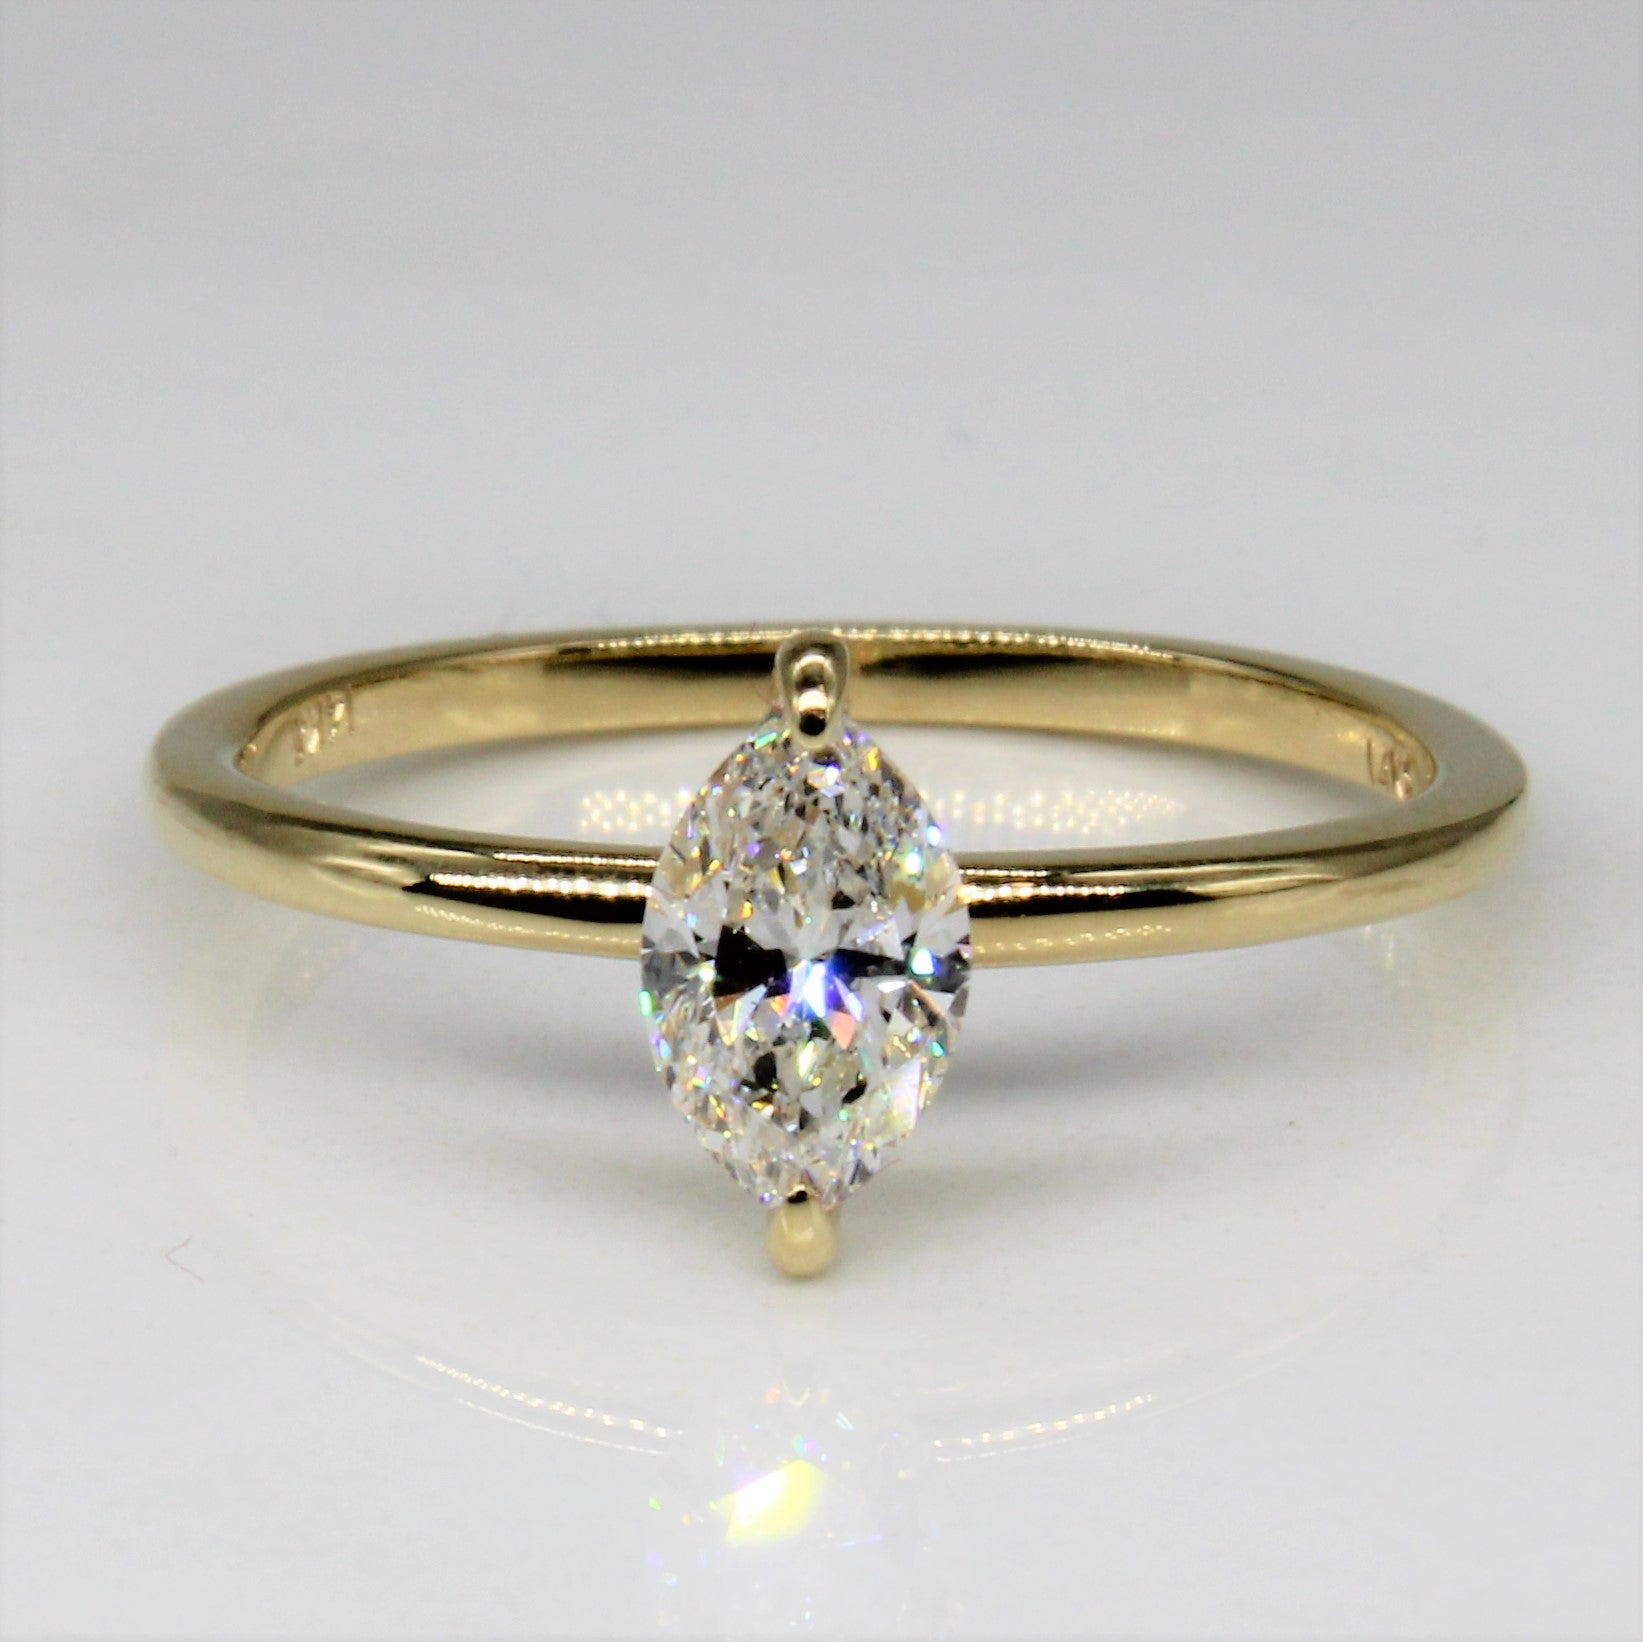 Bespoke' Marquise Diamond Solitaire Engagement Ring | 0.55ct | SZ 6.75 |